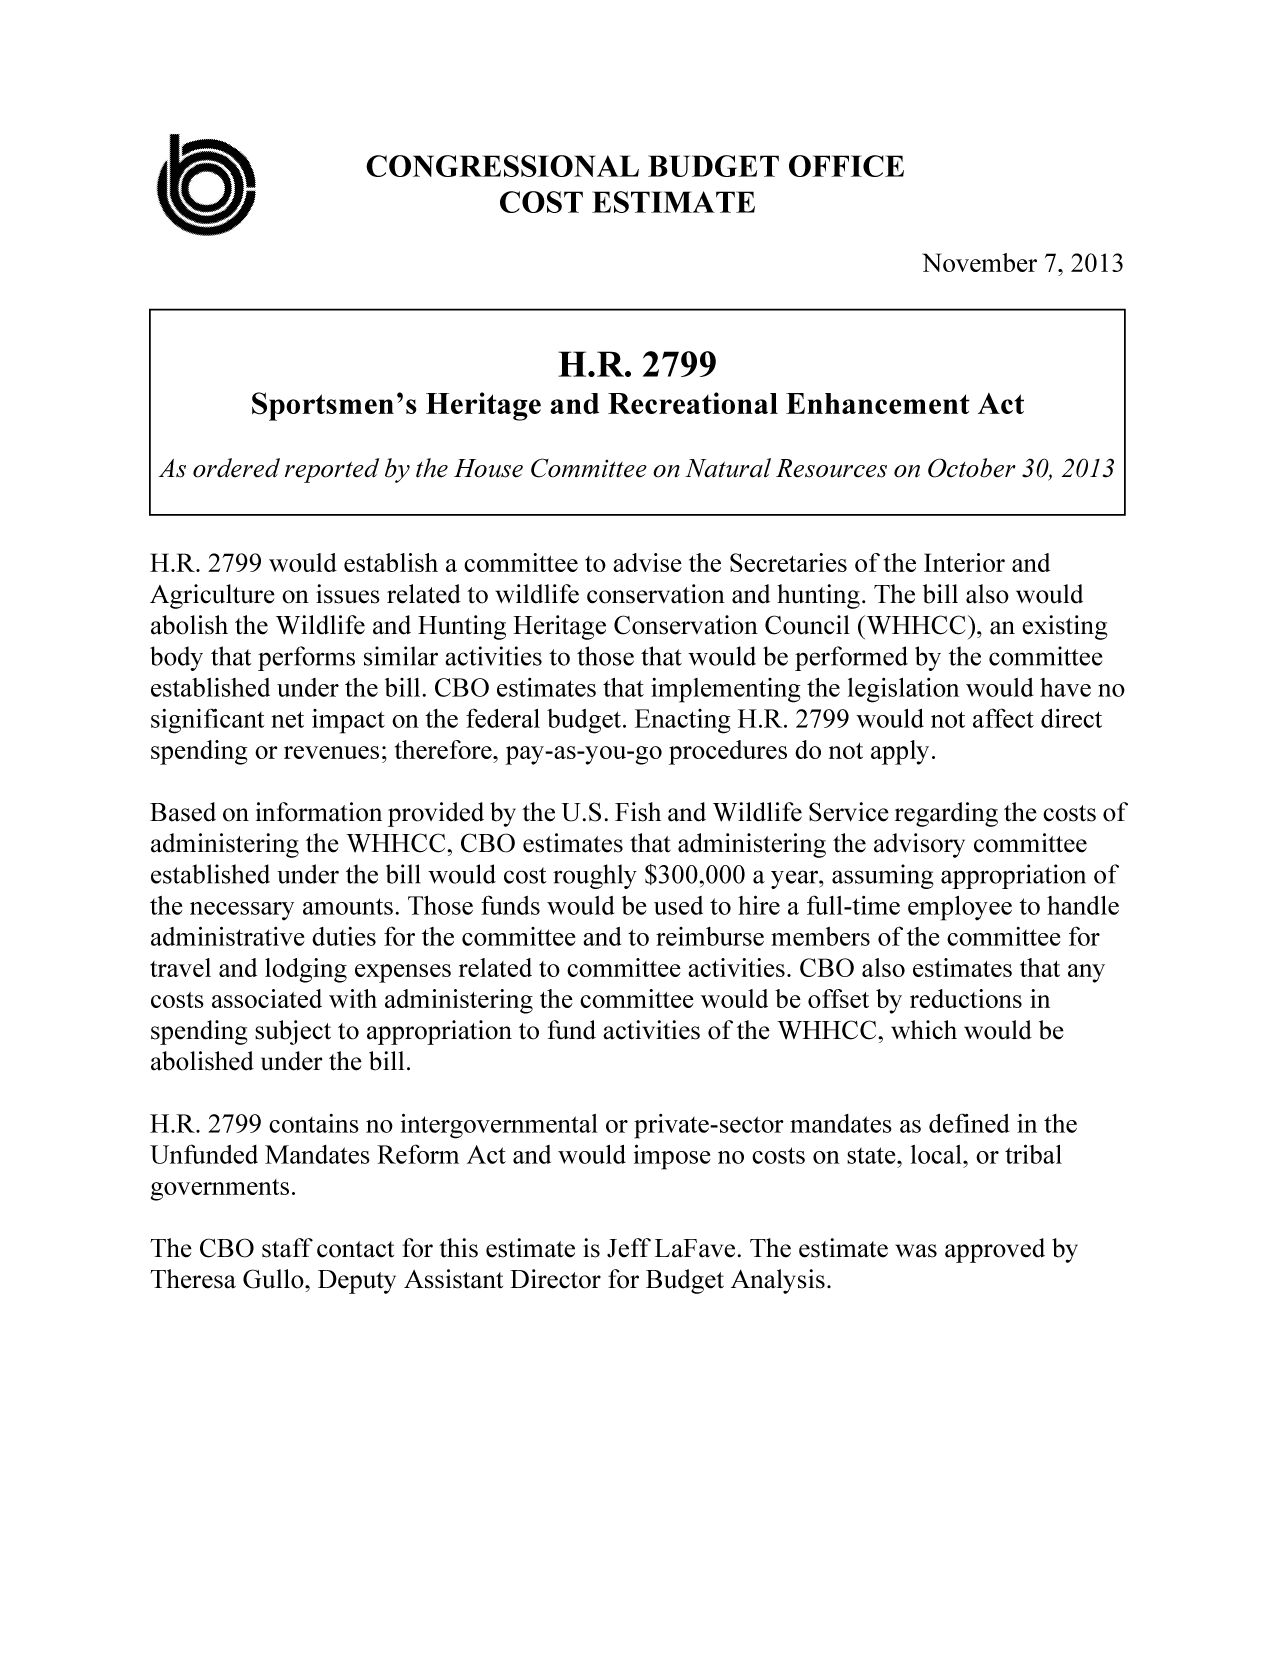 handle is hein.congrec/cbo11365 and id is 1 raw text is: CONGRESSIONAL BUDGET OFFICE
COST ESTIMATE
November 7, 2013
H.R. 2799
Sportsmen's Heritage and Recreational Enhancement Act
As ordered reported by the House Committee on Natural Resources on October 30, 2013
H.R. 2799 would establish a committee to advise the Secretaries of the Interior and
Agriculture on issues related to wildlife conservation and hunting. The bill also would
abolish the Wildlife and Hunting Heritage Conservation Council (WHHCC), an existing
body that performs similar activities to those that would be performed by the committee
established under the bill. CBO estimates that implementing the legislation would have no
significant net impact on the federal budget. Enacting H.R. 2799 would not affect direct
spending or revenues; therefore, pay-as-you-go procedures do not apply.
Based on information provided by the U.S. Fish and Wildlife Service regarding the costs of
administering the WHHCC, CBO estimates that administering the advisory committee
established under the bill would cost roughly $300,000 a year, assuming appropriation of
the necessary amounts. Those funds would be used to hire a full-time employee to handle
administrative duties for the committee and to reimburse members of the committee for
travel and lodging expenses related to committee activities. CBO also estimates that any
costs associated with administering the committee would be offset by reductions in
spending subject to appropriation to fund activities of the WHHCC, which would be
abolished under the bill.
H.R. 2799 contains no intergovernmental or private-sector mandates as defined in the
Unfunded Mandates Reform Act and would impose no costs on state, local, or tribal
governments.
The CBO staff contact for this estimate is Jeff LaFave. The estimate was approved by
Theresa Gullo, Deputy Assistant Director for Budget Analysis.


